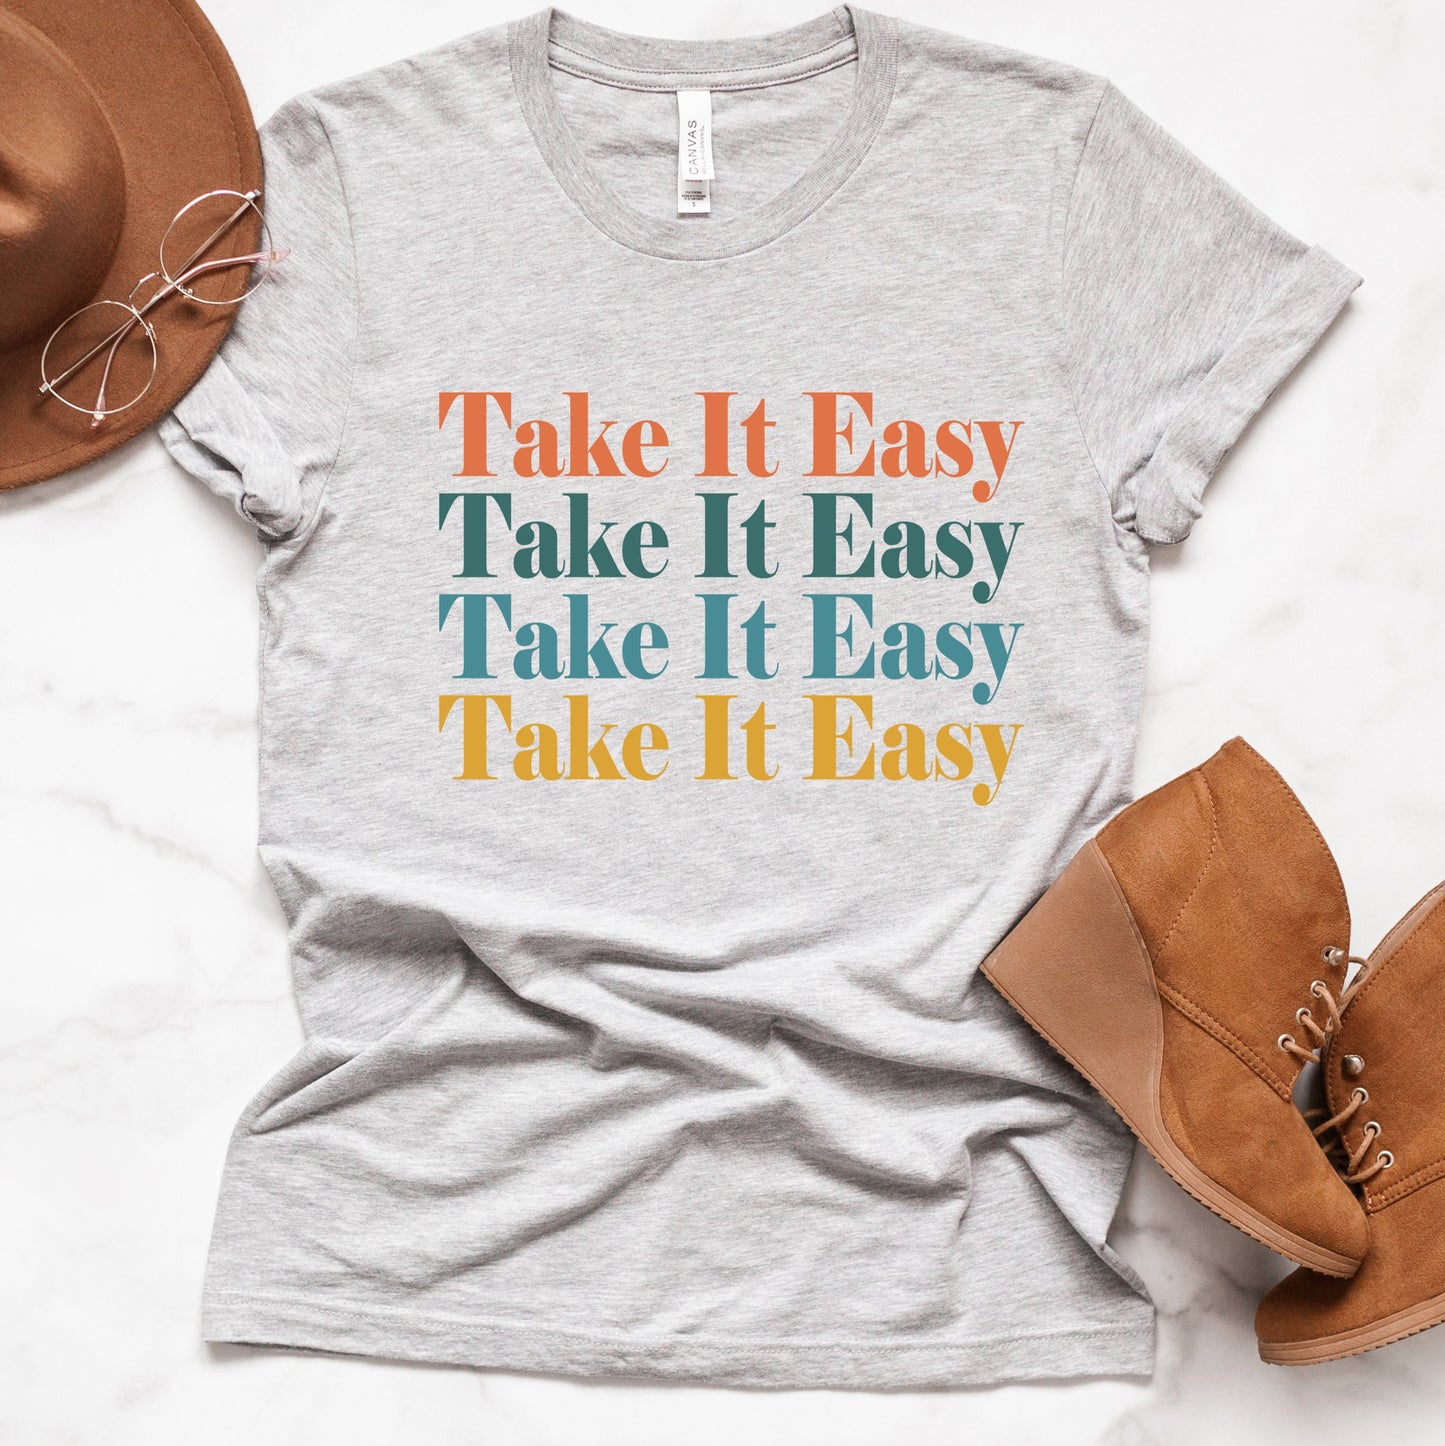 Take It Easy Colorful Tee